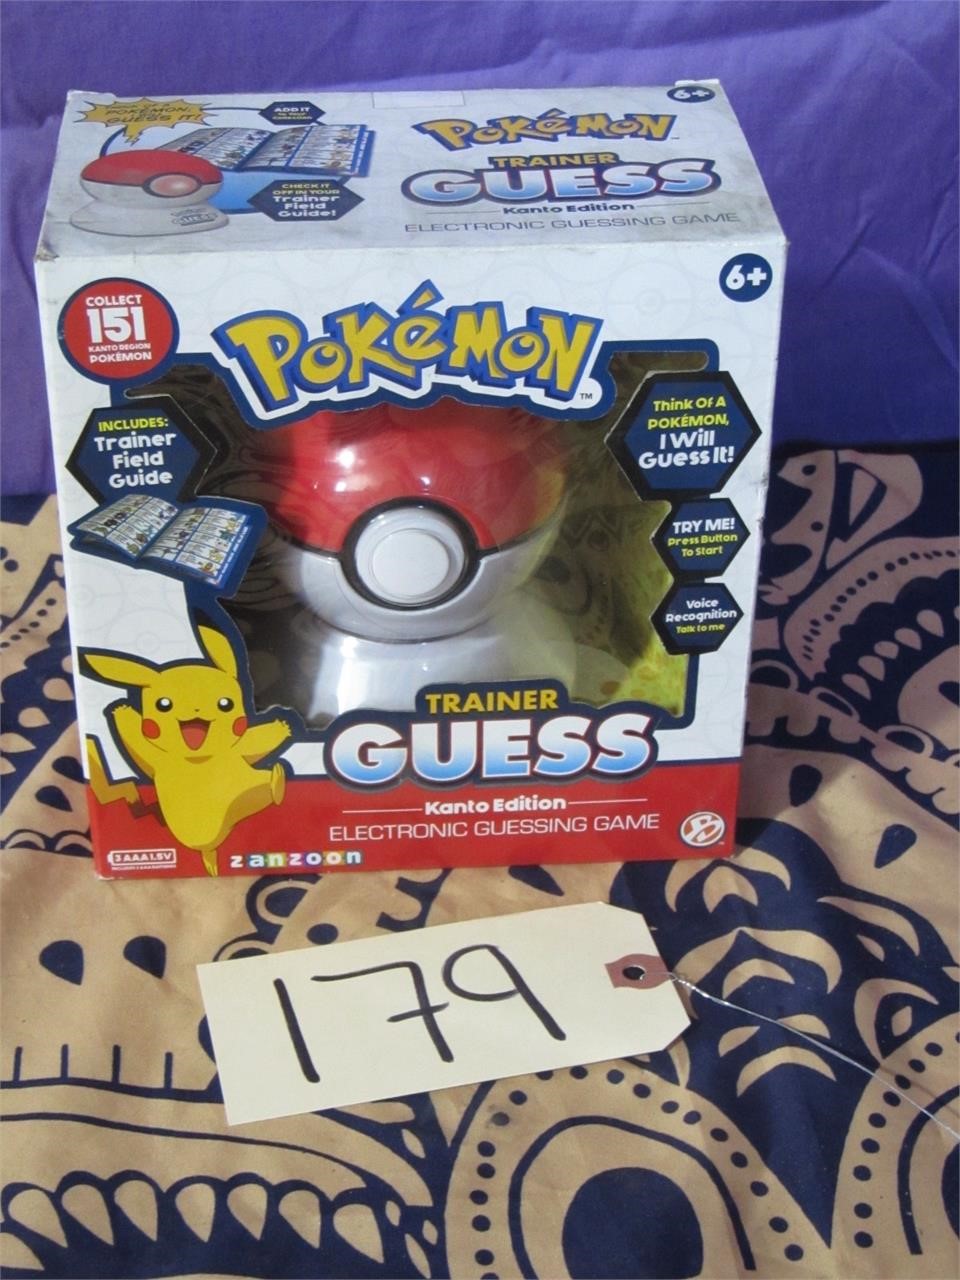 New Pokemon Trainer Guess Kanto Edition Game